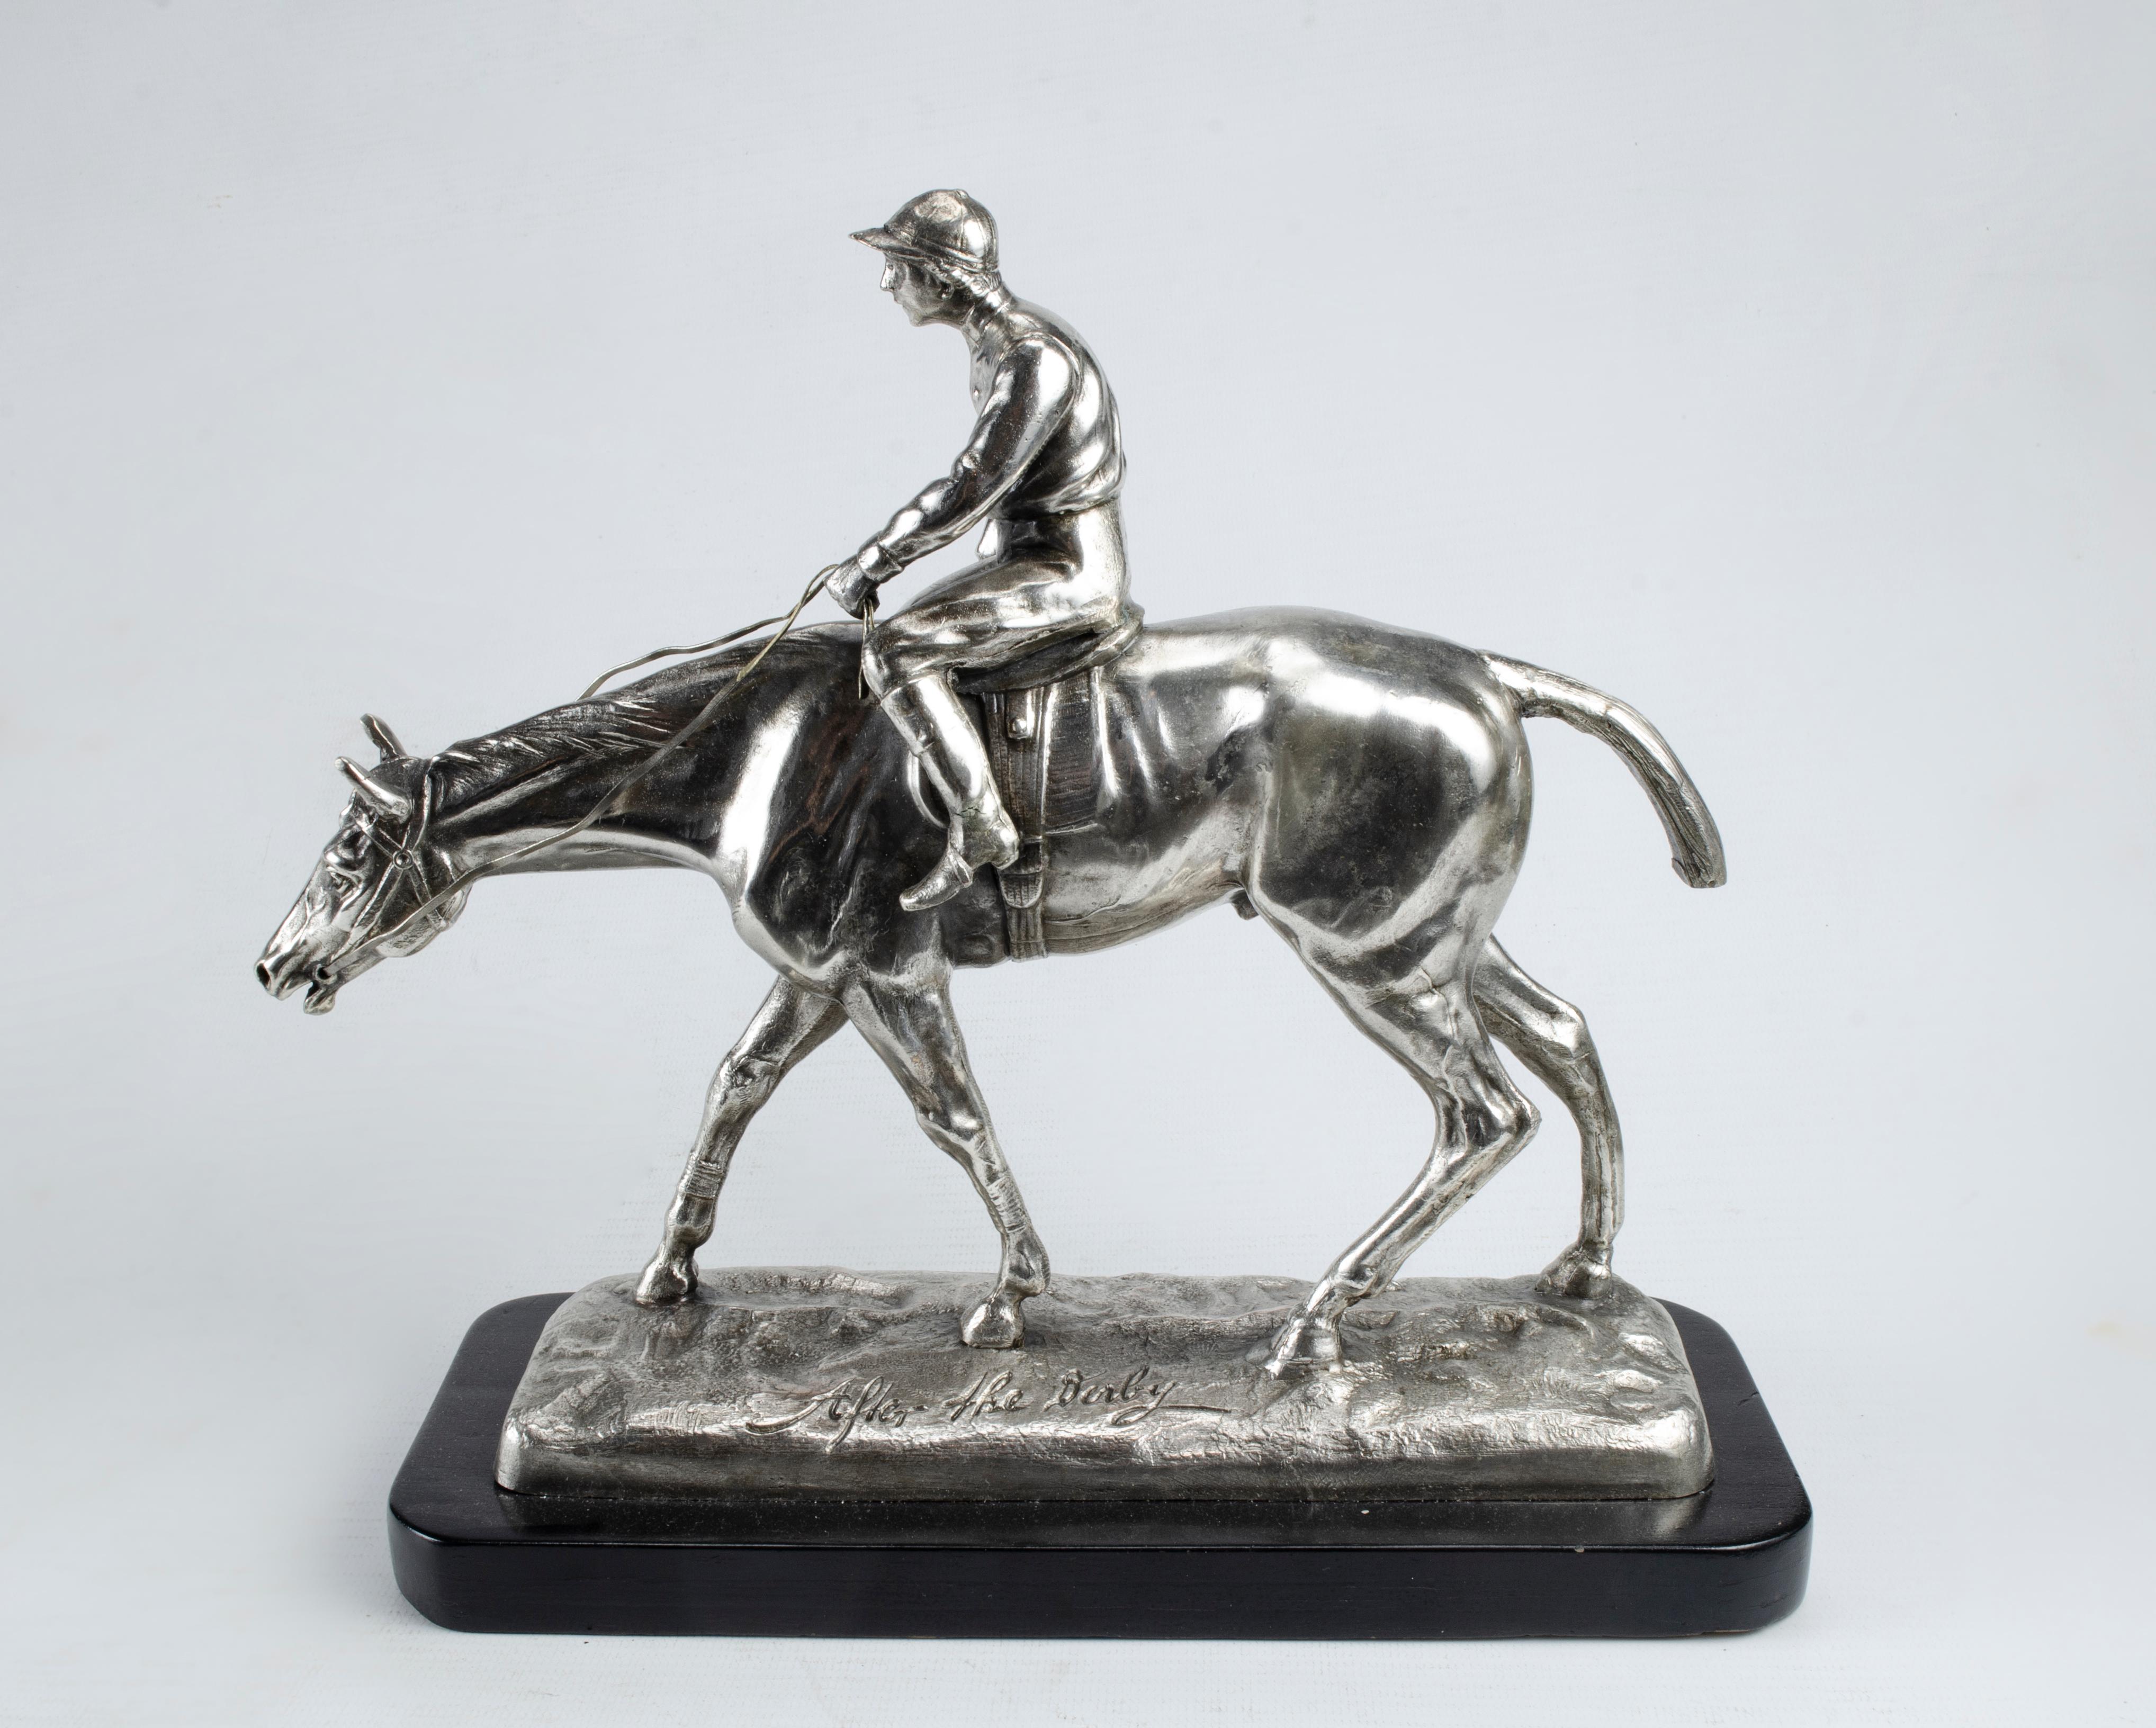 Sculpture after derby.
Material: Pewter with silver patina.
Origin Germany Circa 1900.
Good condition natural wear.
Racehorse and Jockey.
Patinated wooden base.
Art nouveau, modernist art or modernism was an international artistic and decorative